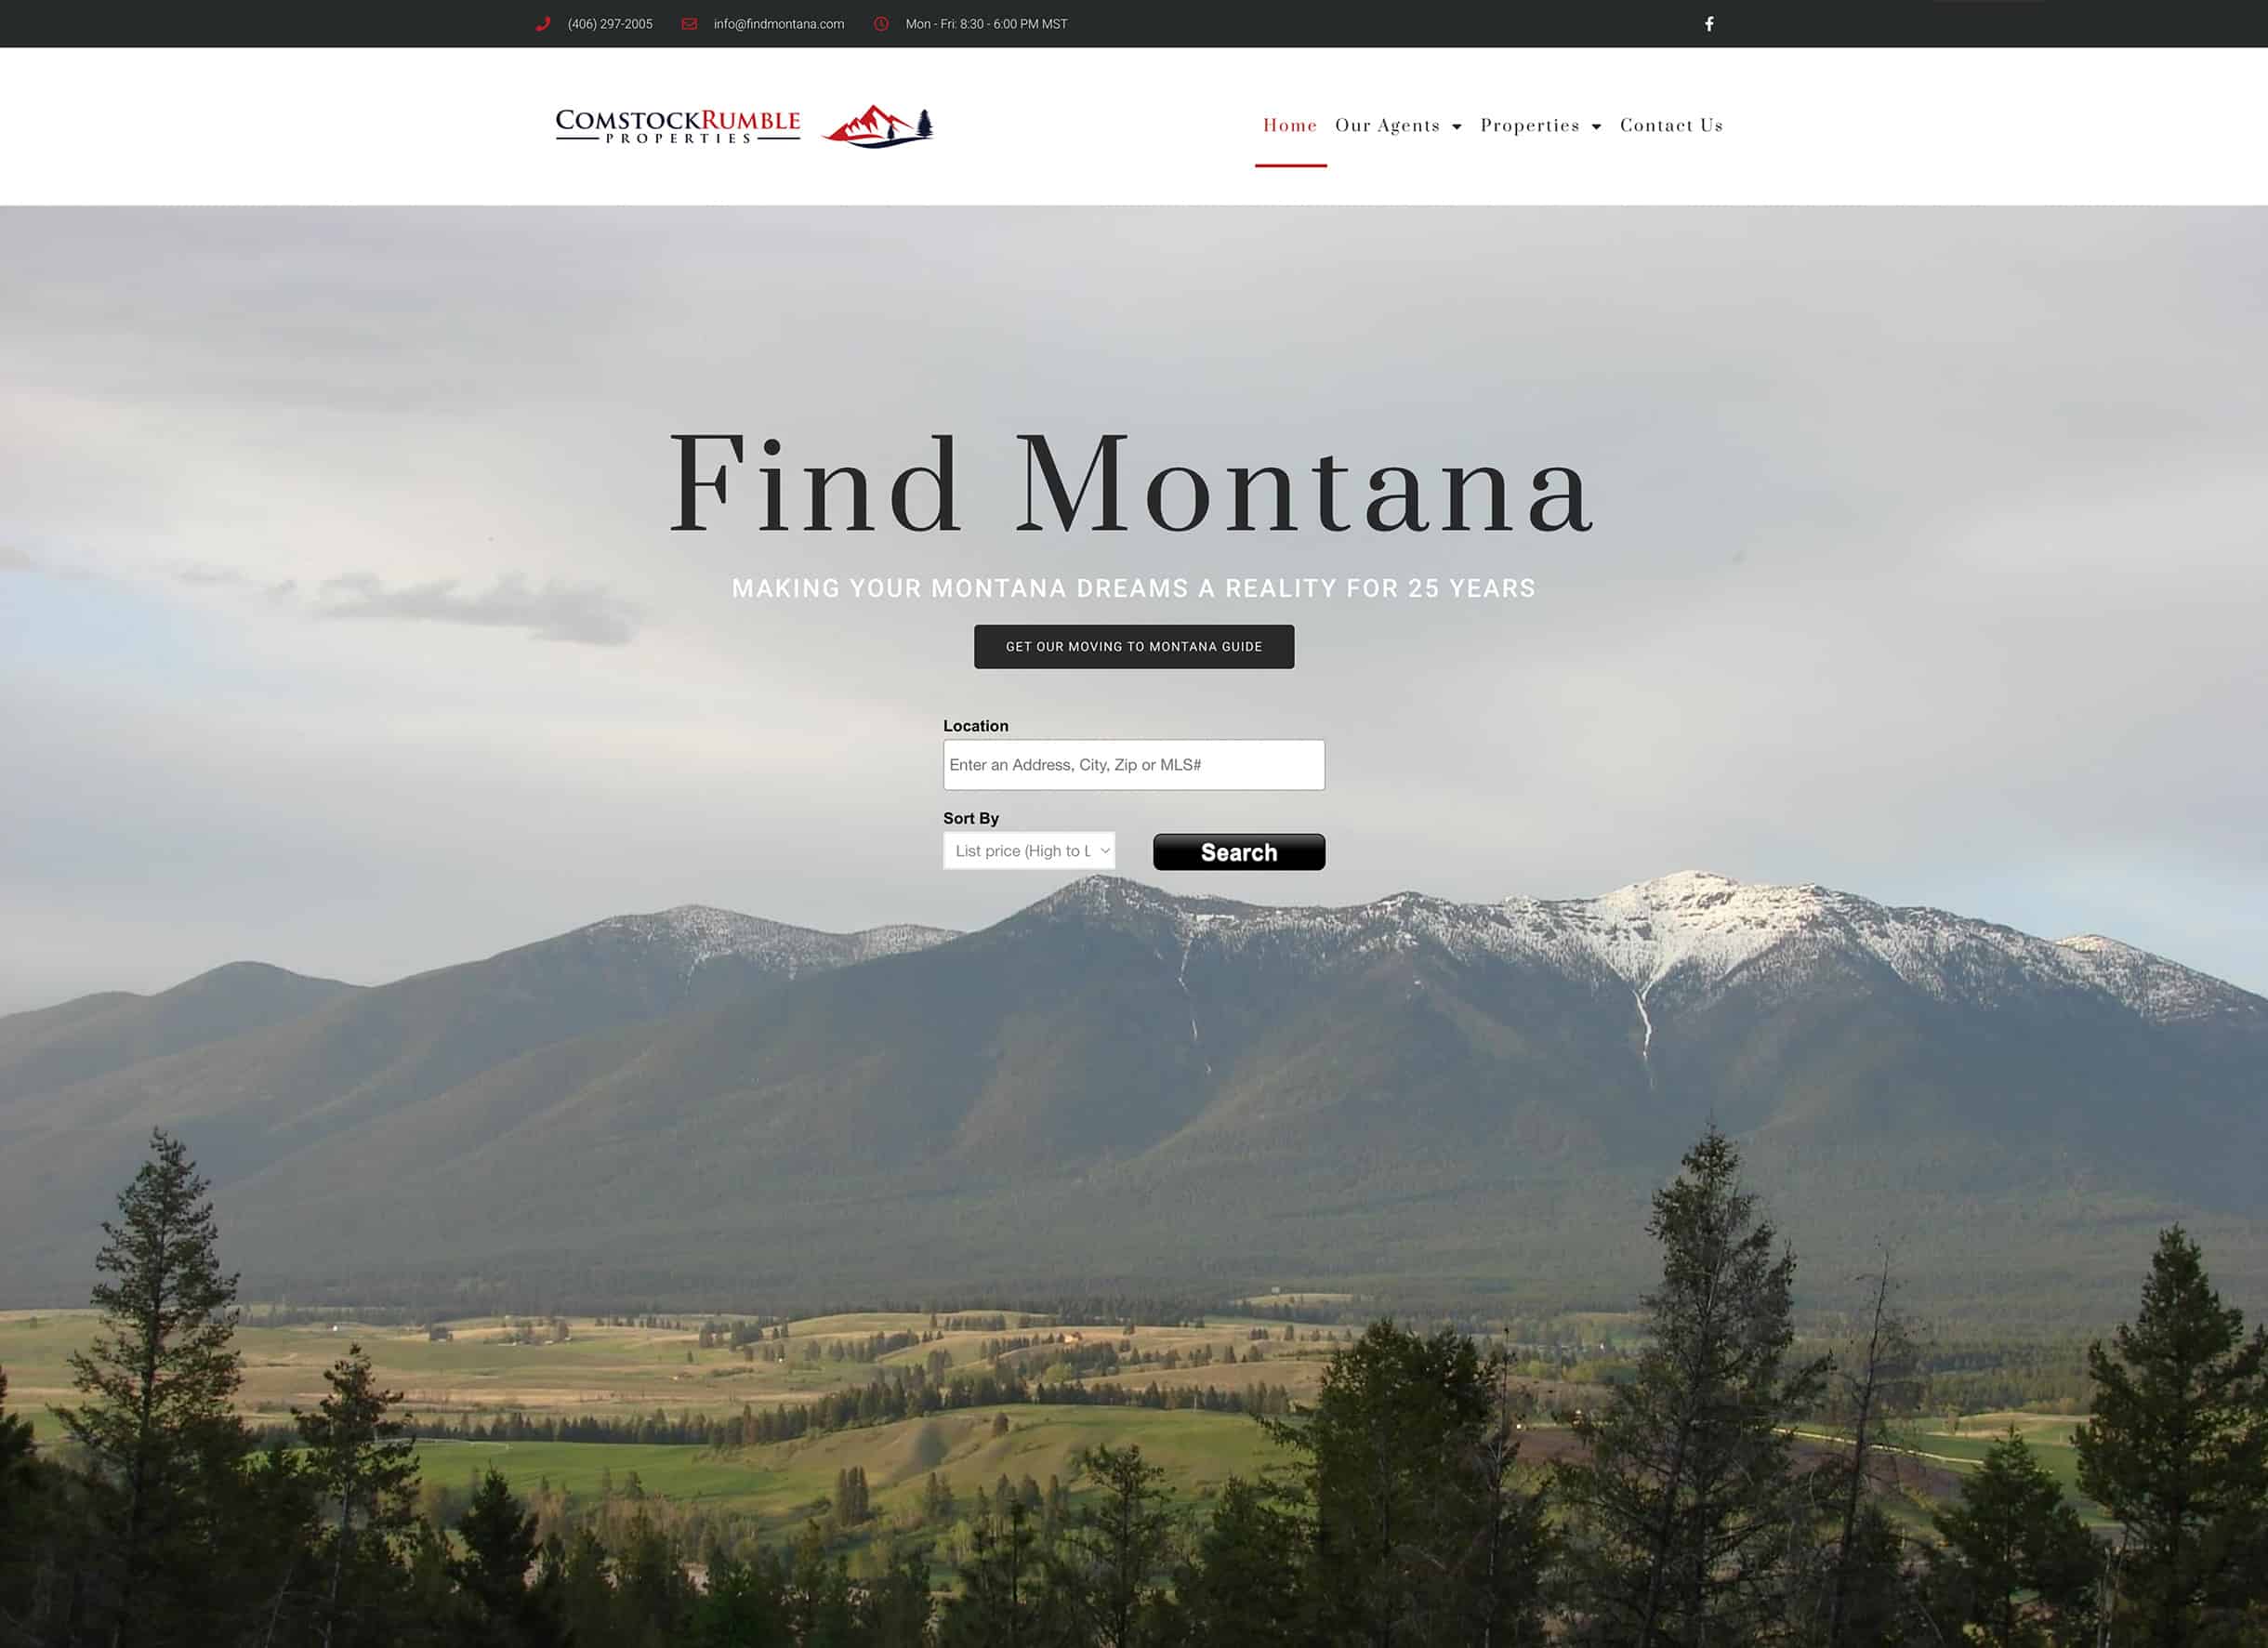 Find Montana Comstock Rumble Real Estate